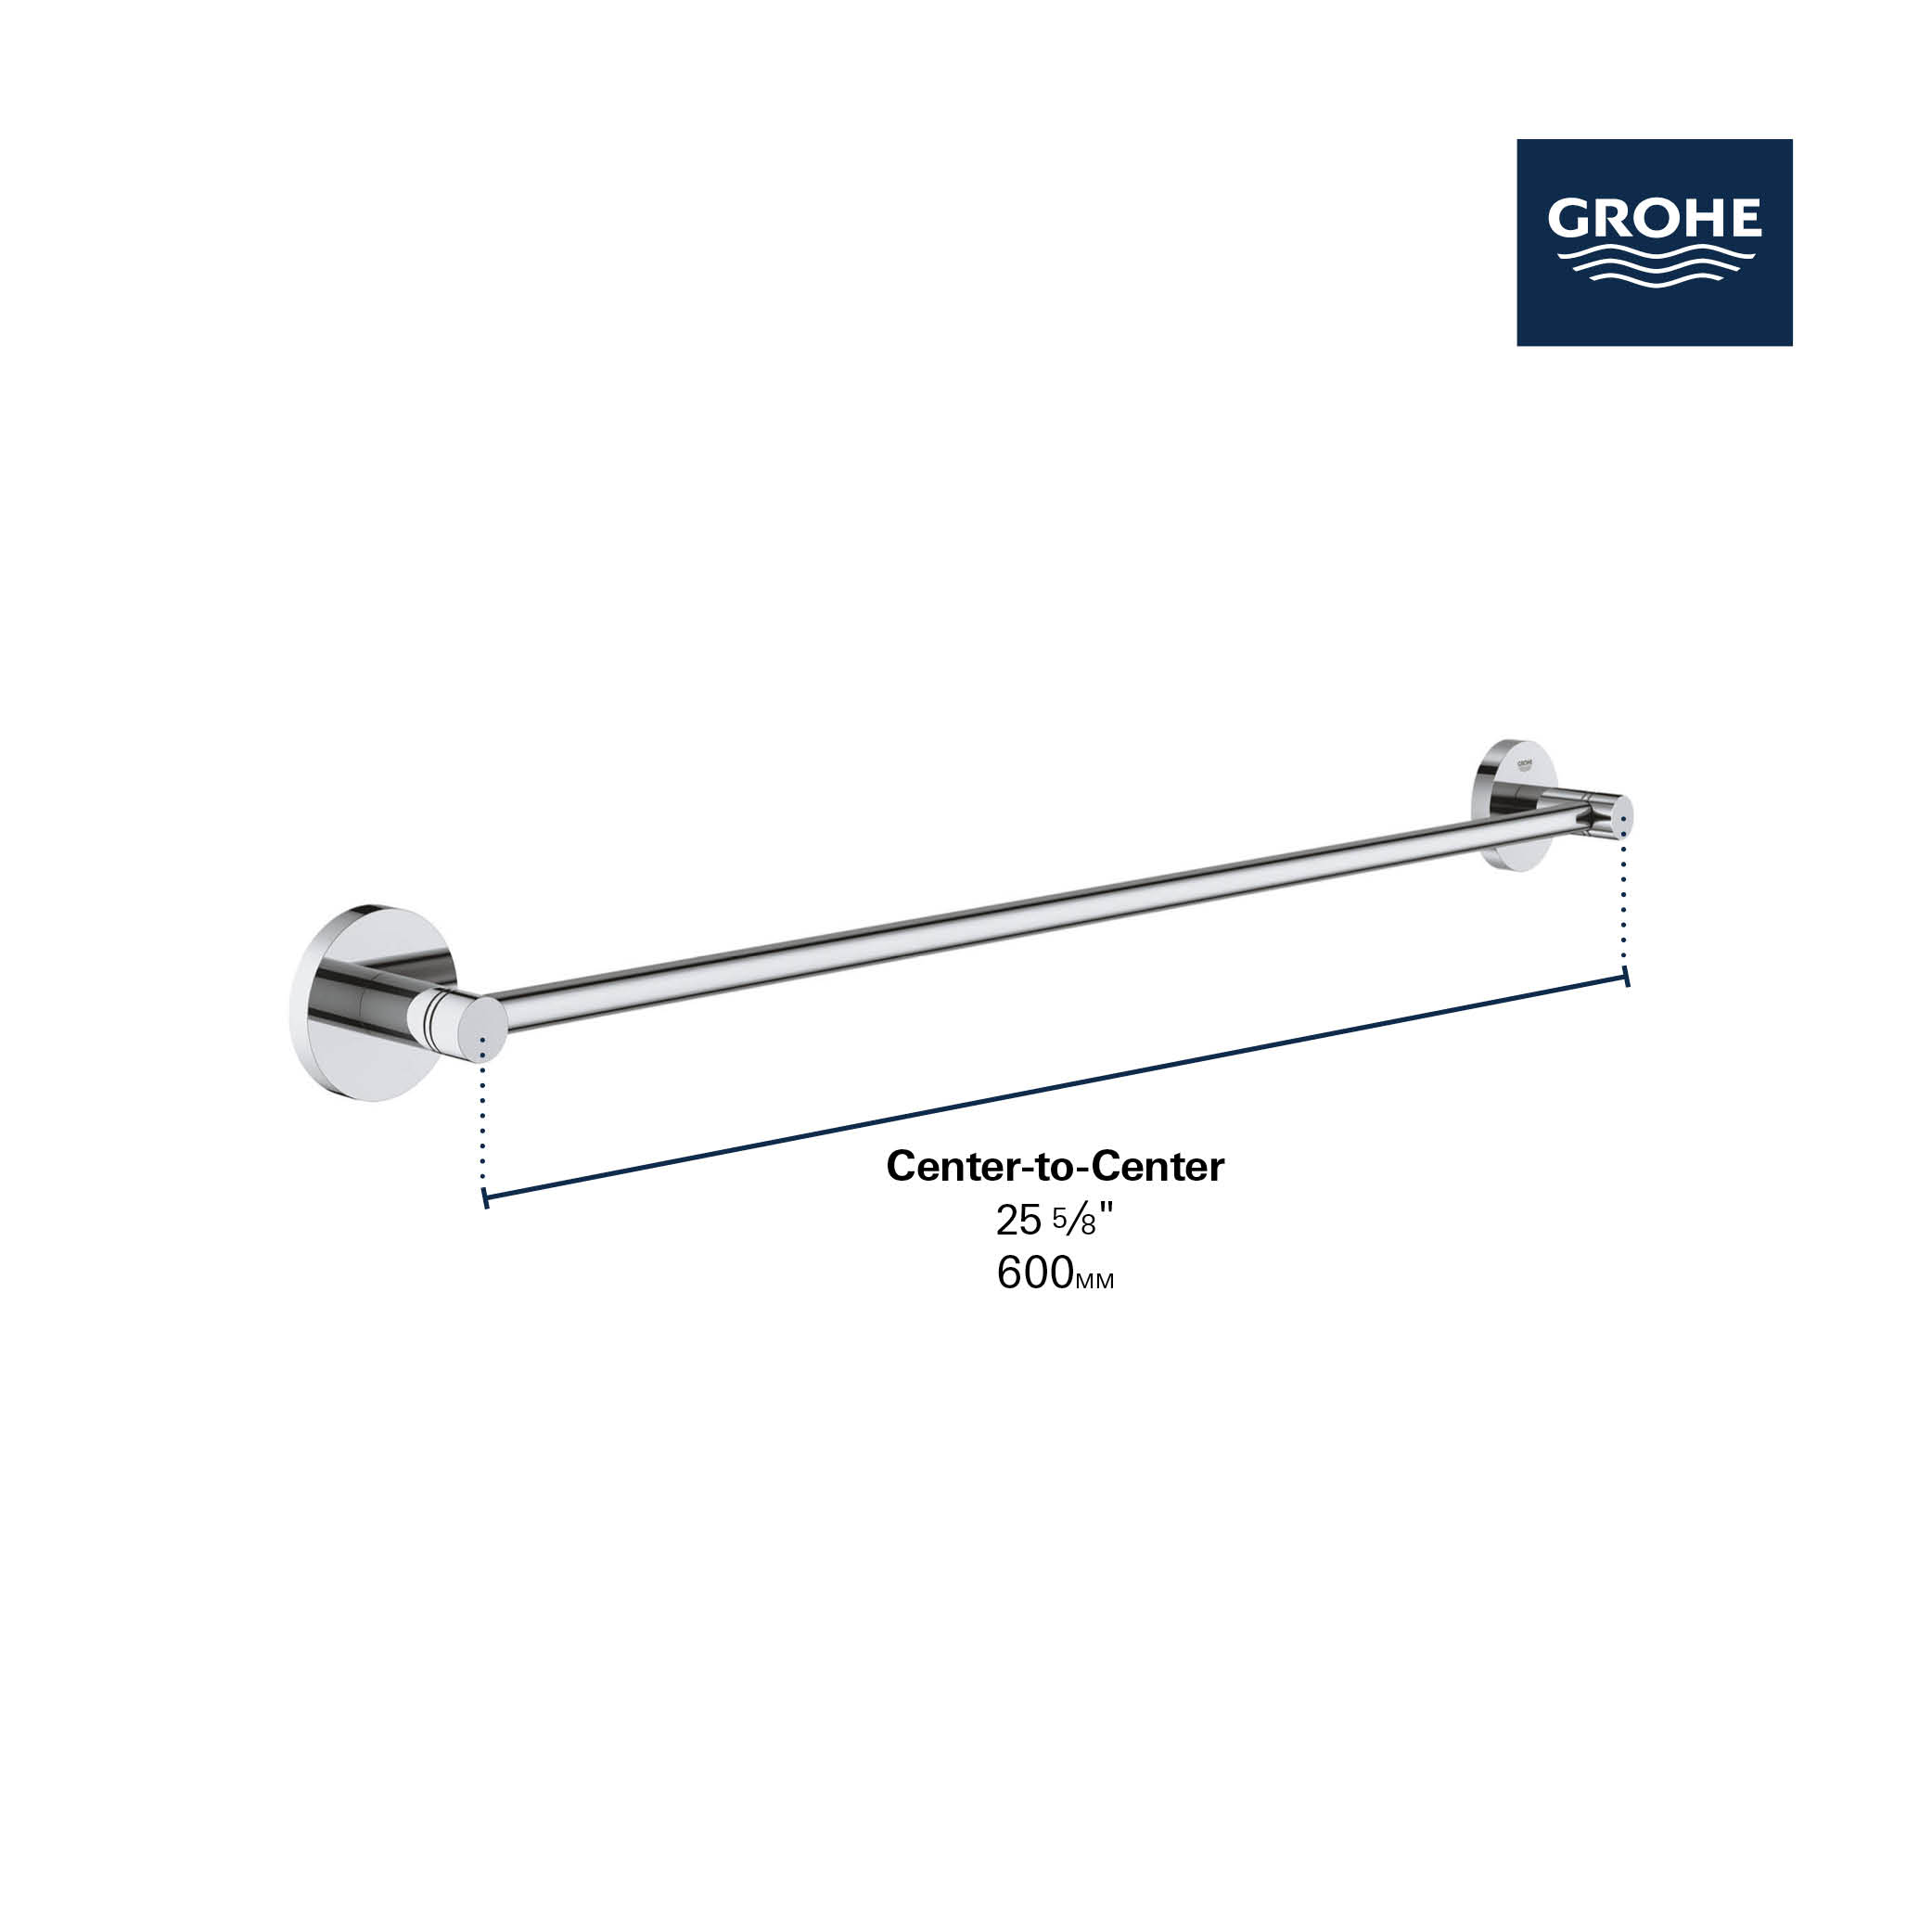 Brushed Nickel HH1 Grohe Towel Bar 40653 Essentials Authentic 24" Towel Rail 